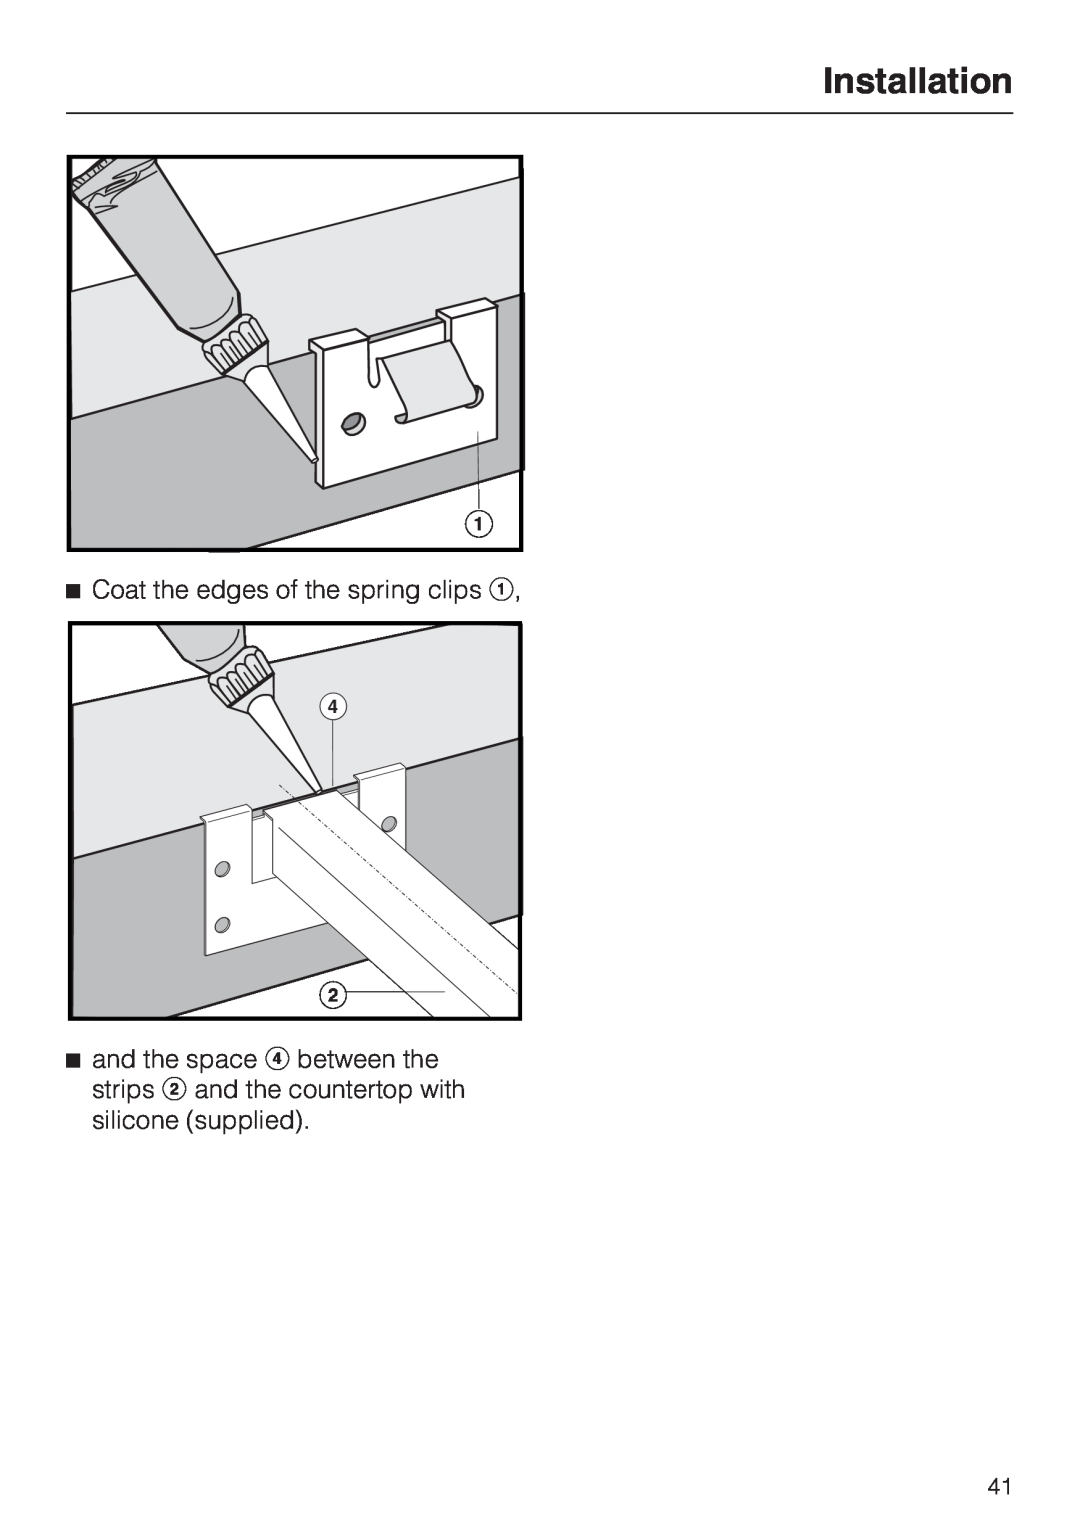 Miele CS1212 installation instructions Installation, Coat the edges of the spring clips a 